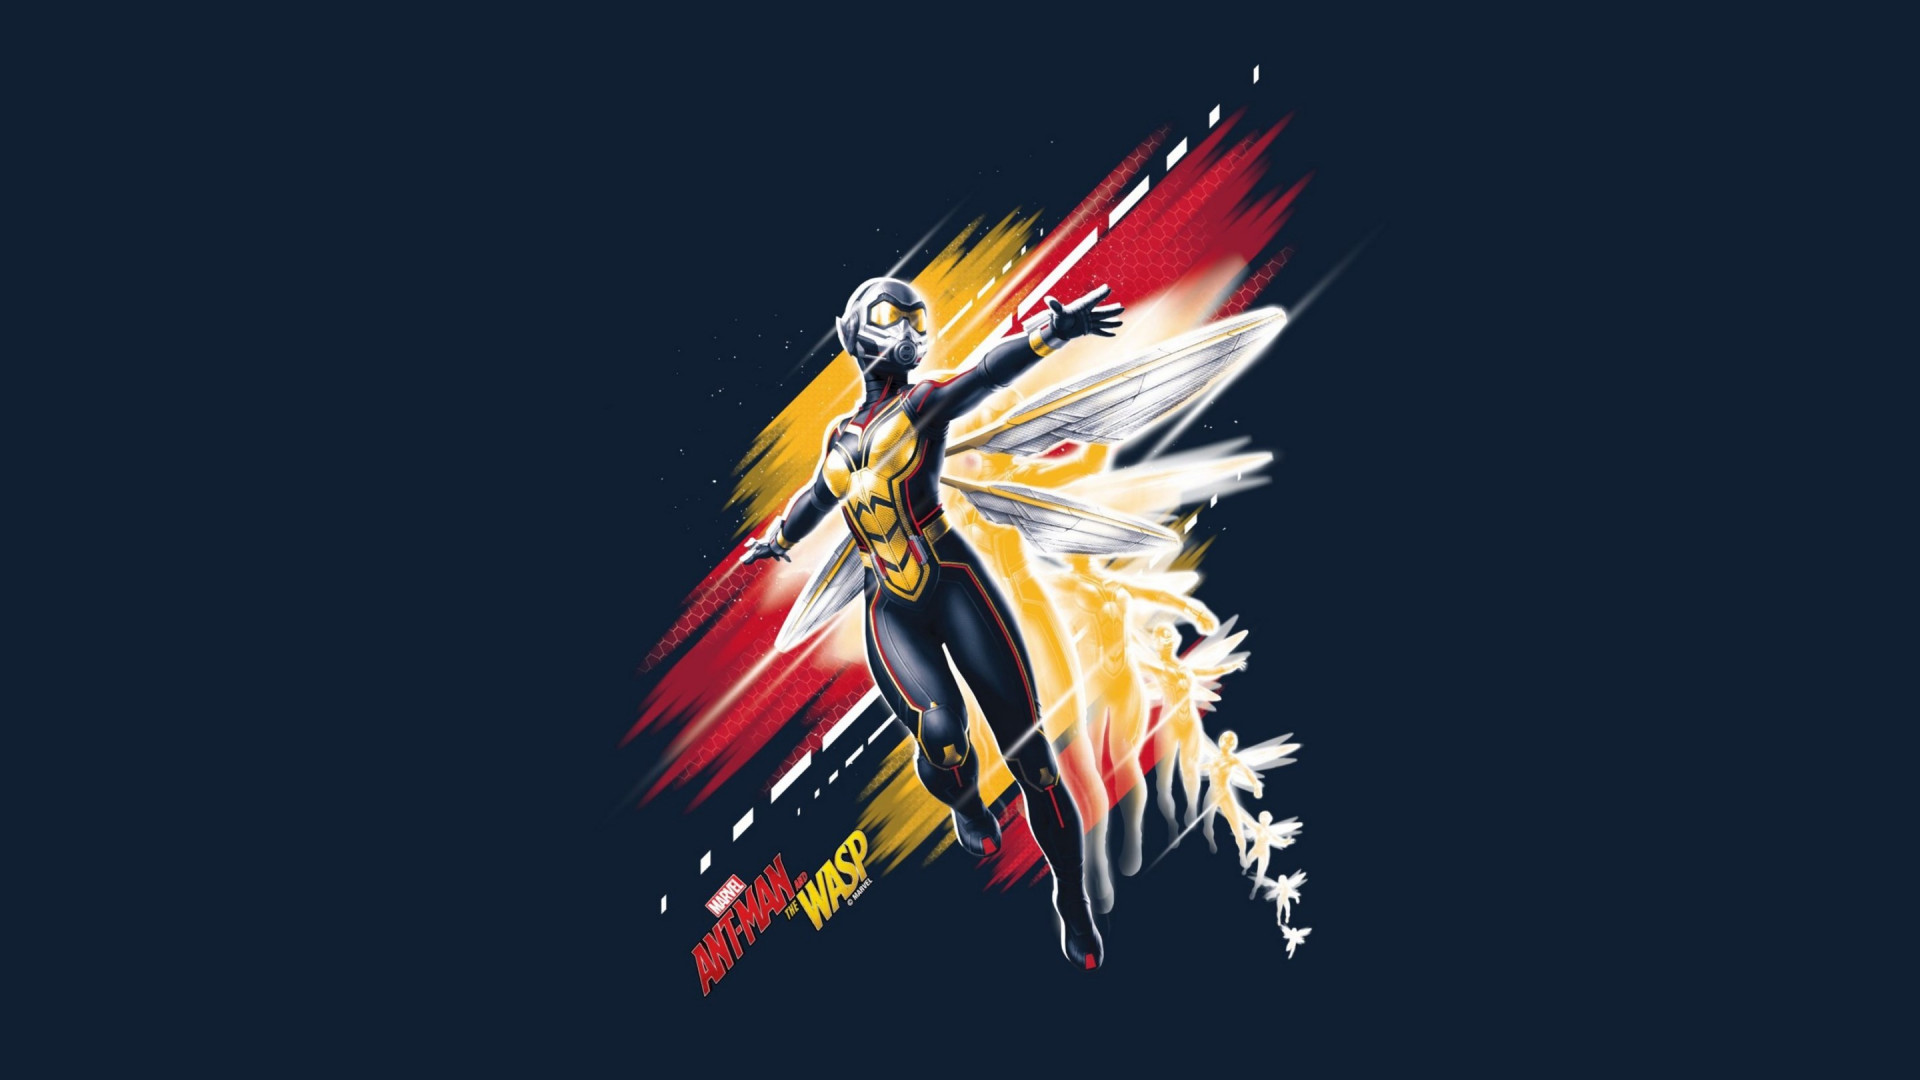 Ant-Man and the Wasp wallpaper 1920x1080